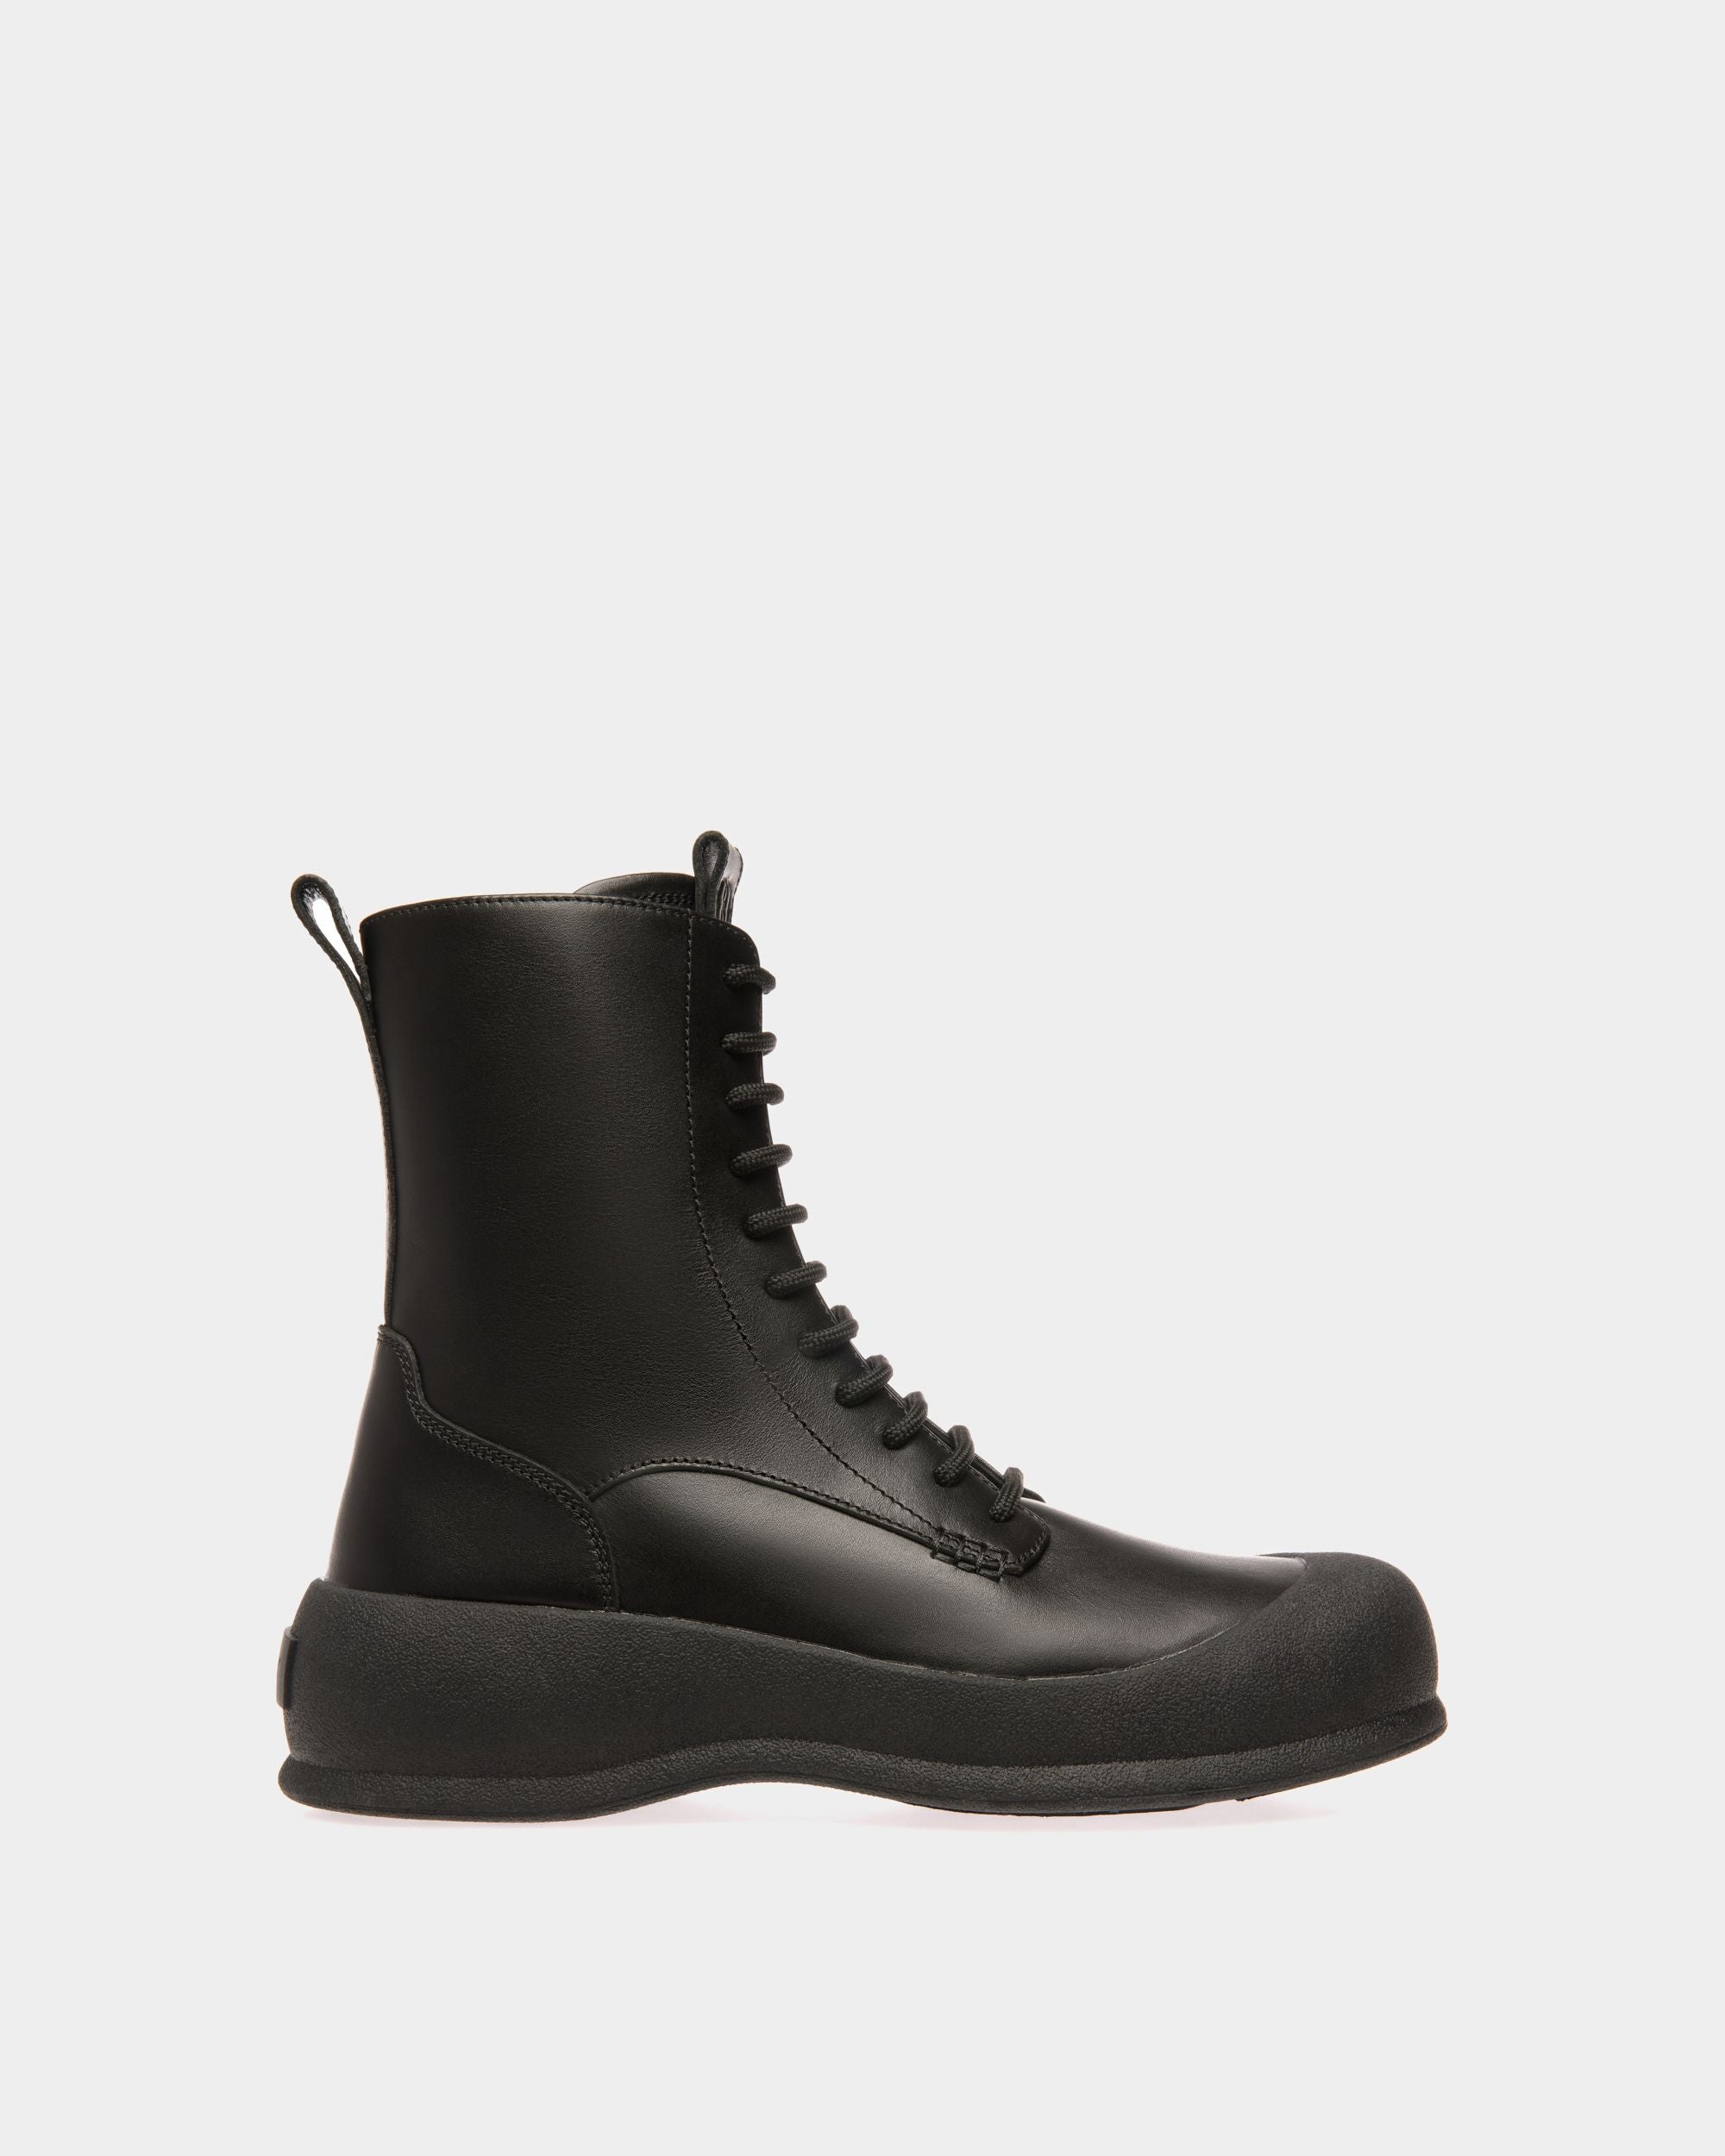 Celsyo | Women's Booties | Black Leather | Bally | Still Life Side